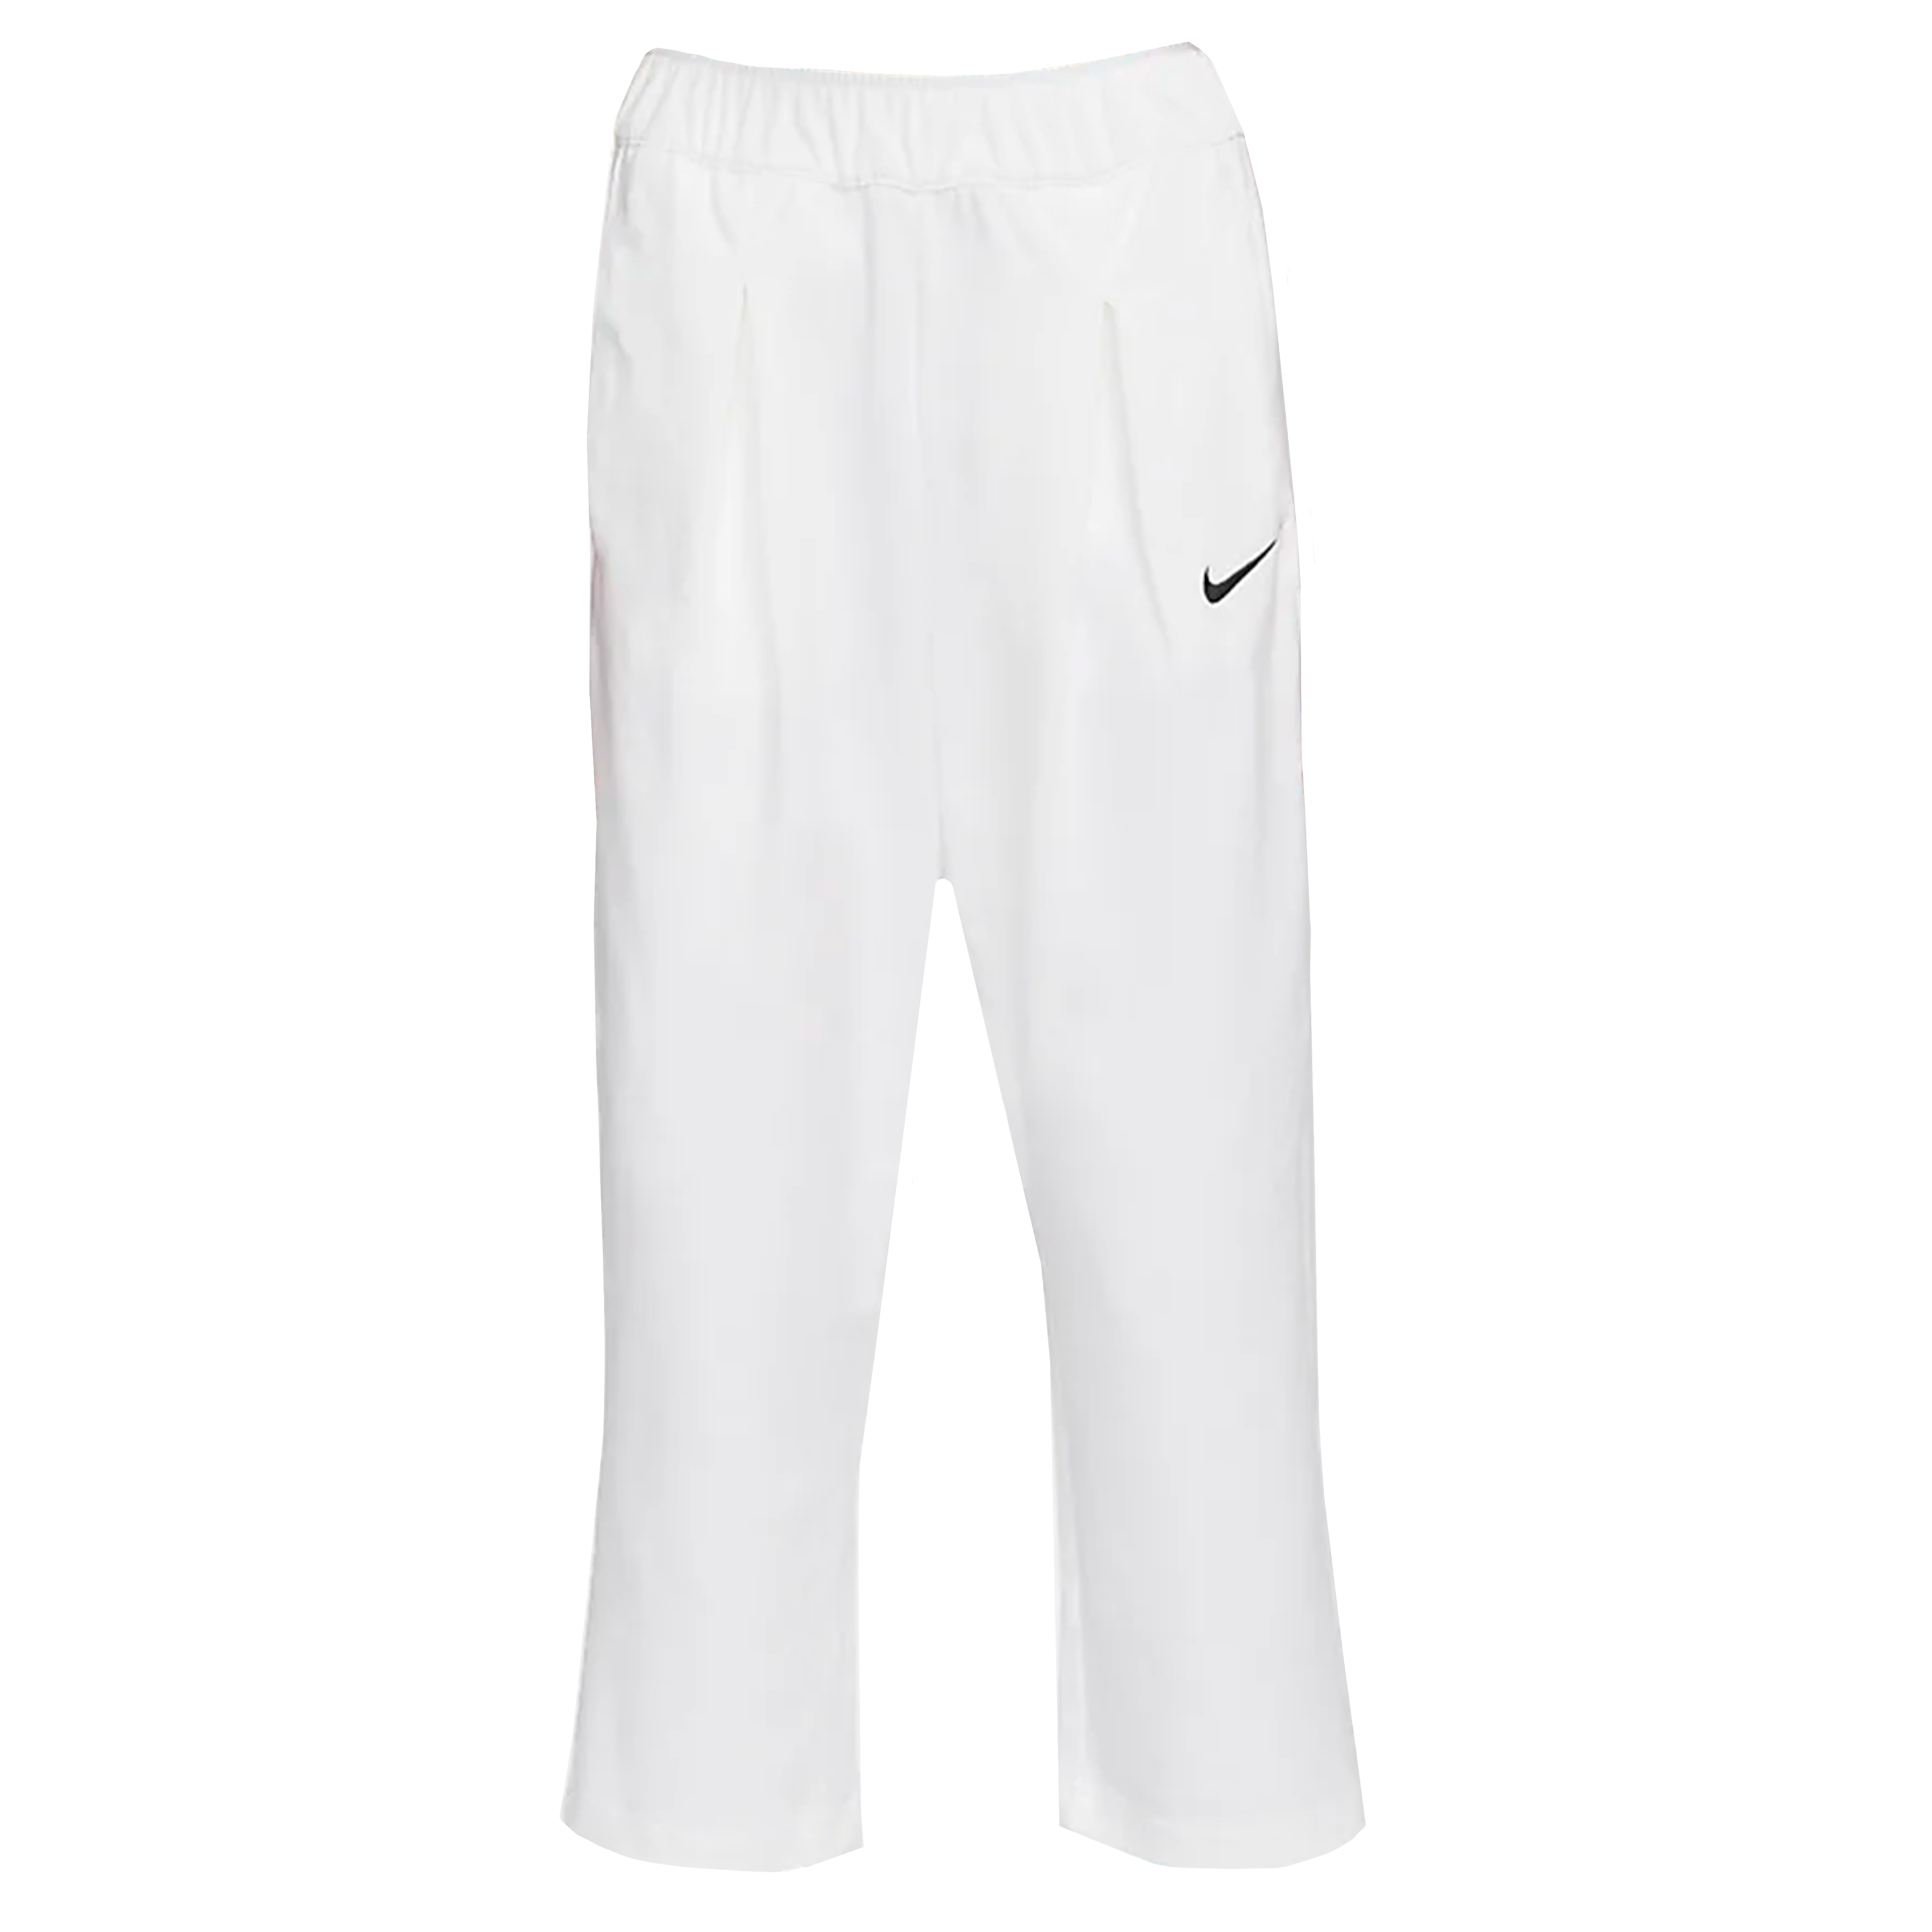 Cricket Whites Pants By Cricket Equipment USA - Free Ground Shipping Over  $150 Price $29.05 Shop Now!